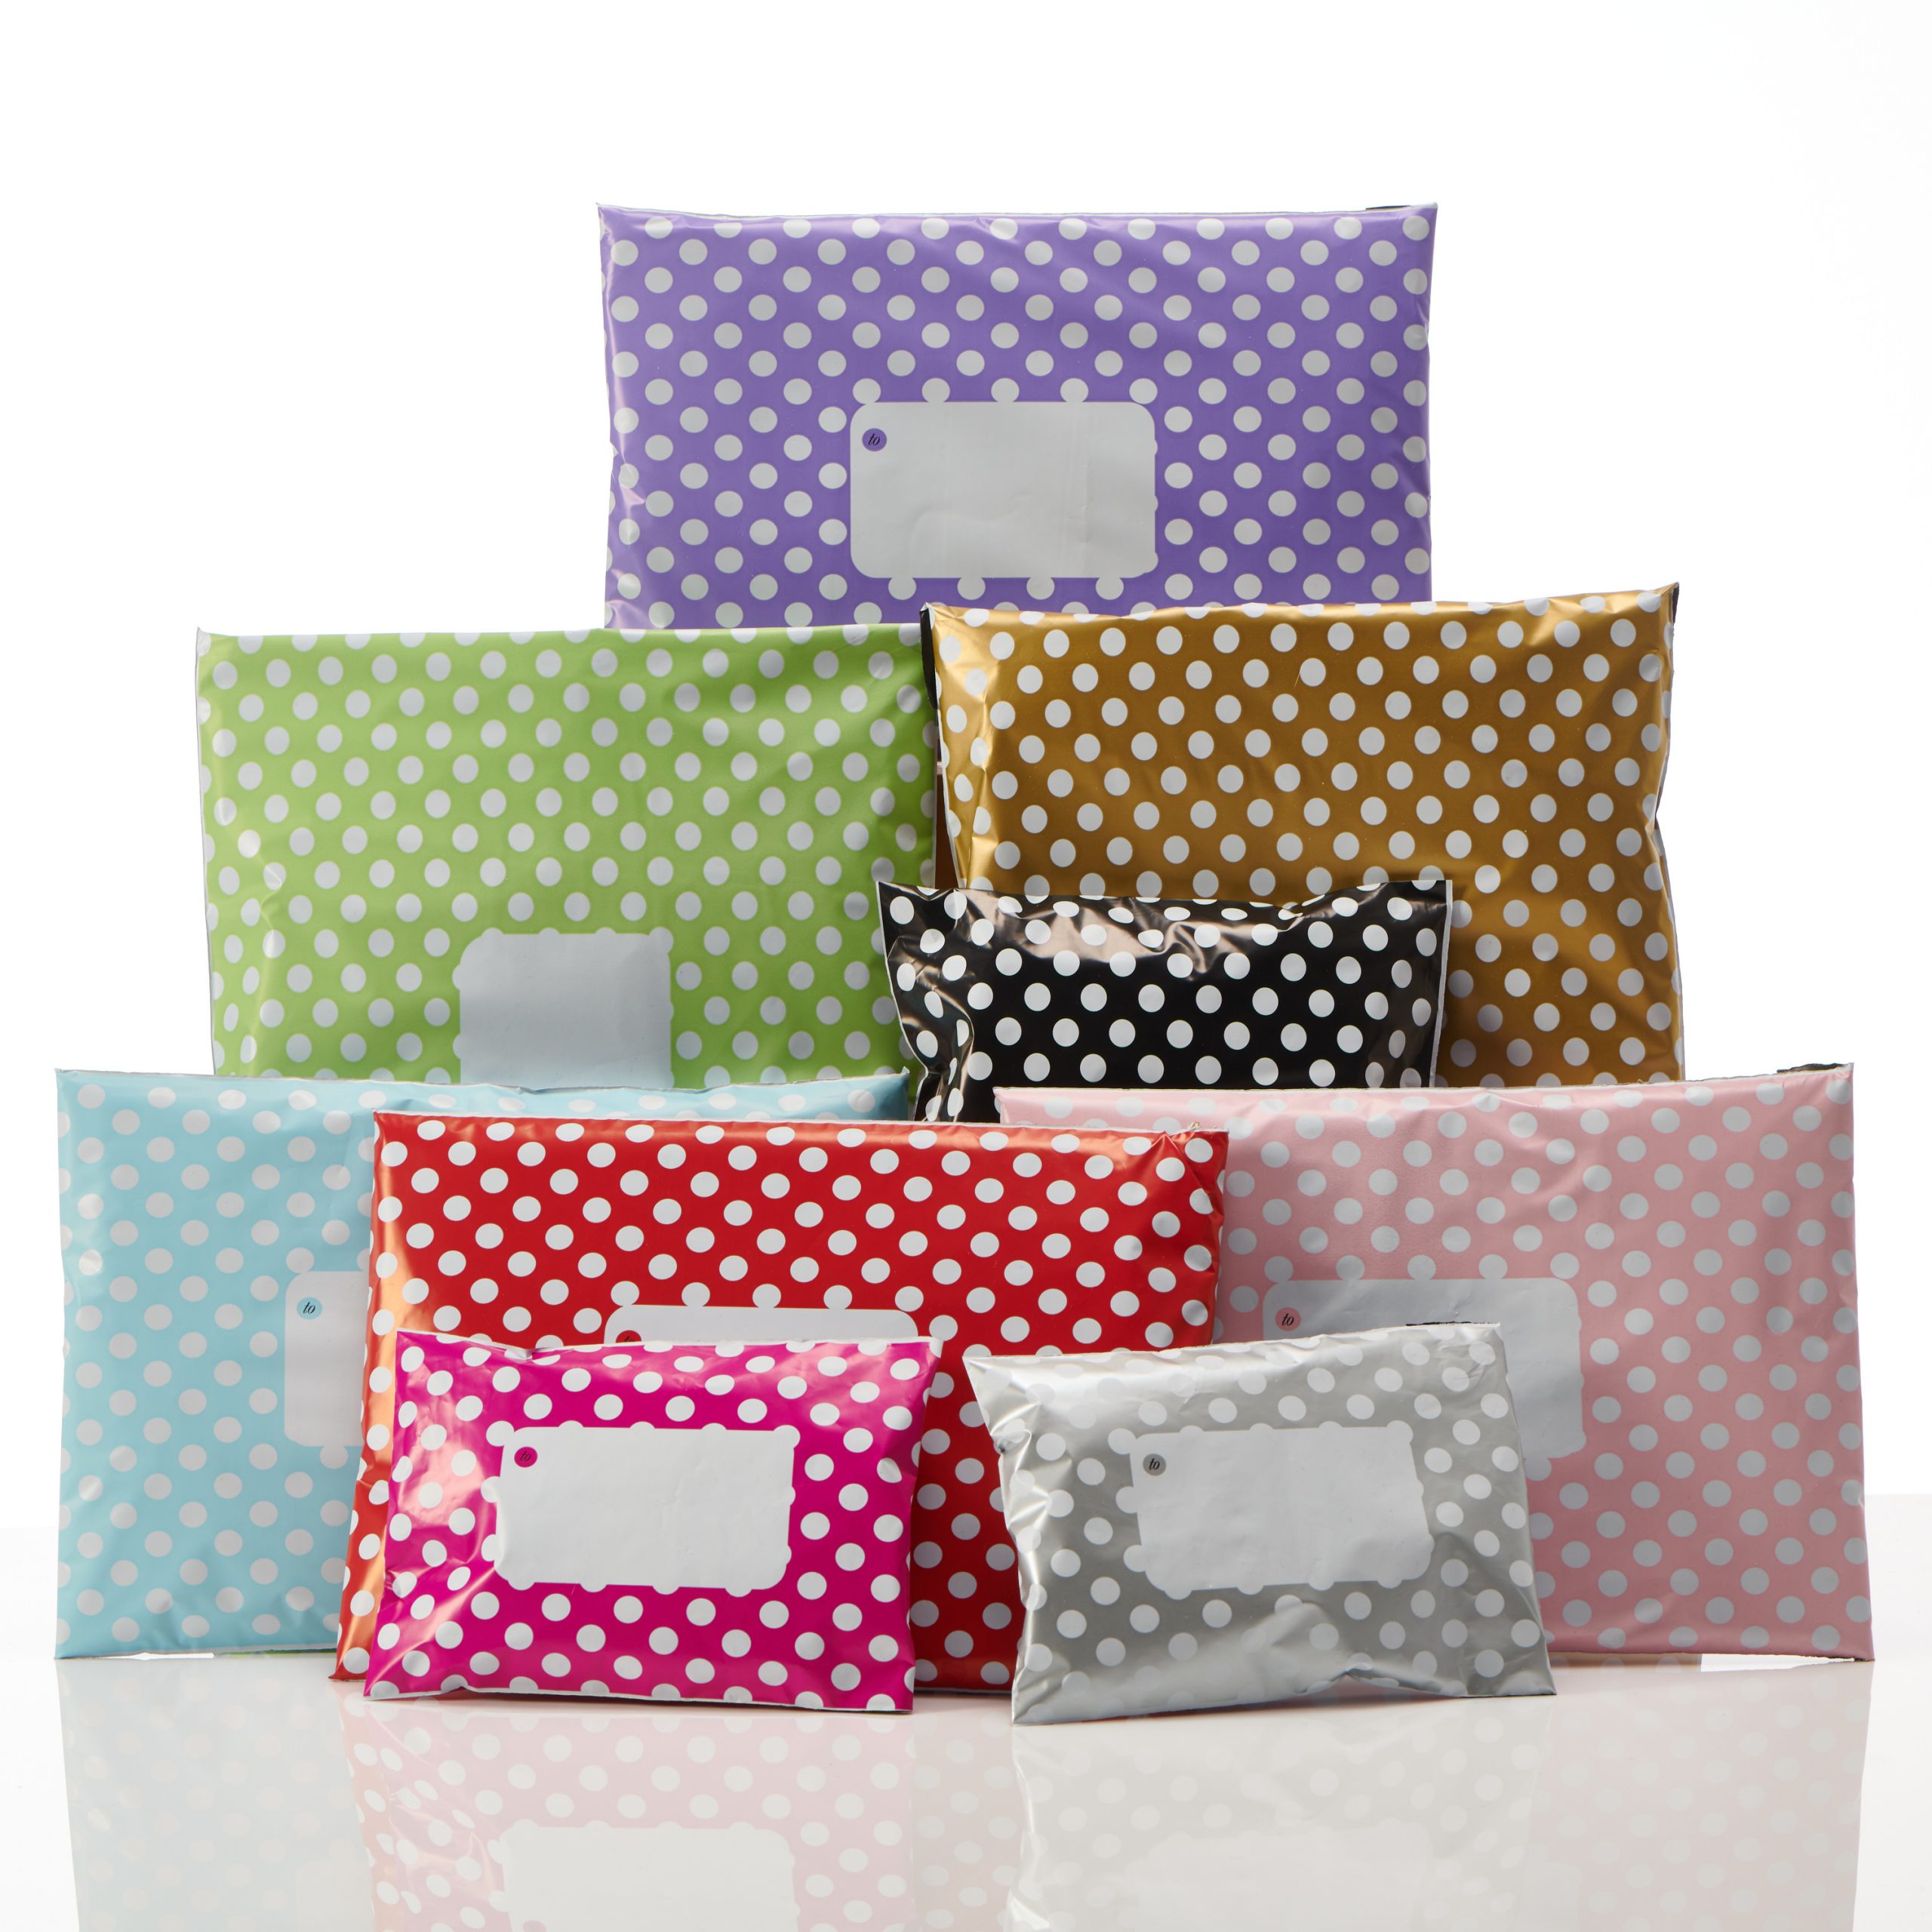 10 Pink Polka Dots 10" x 14" Mailing Postage Postal Mail Bags 